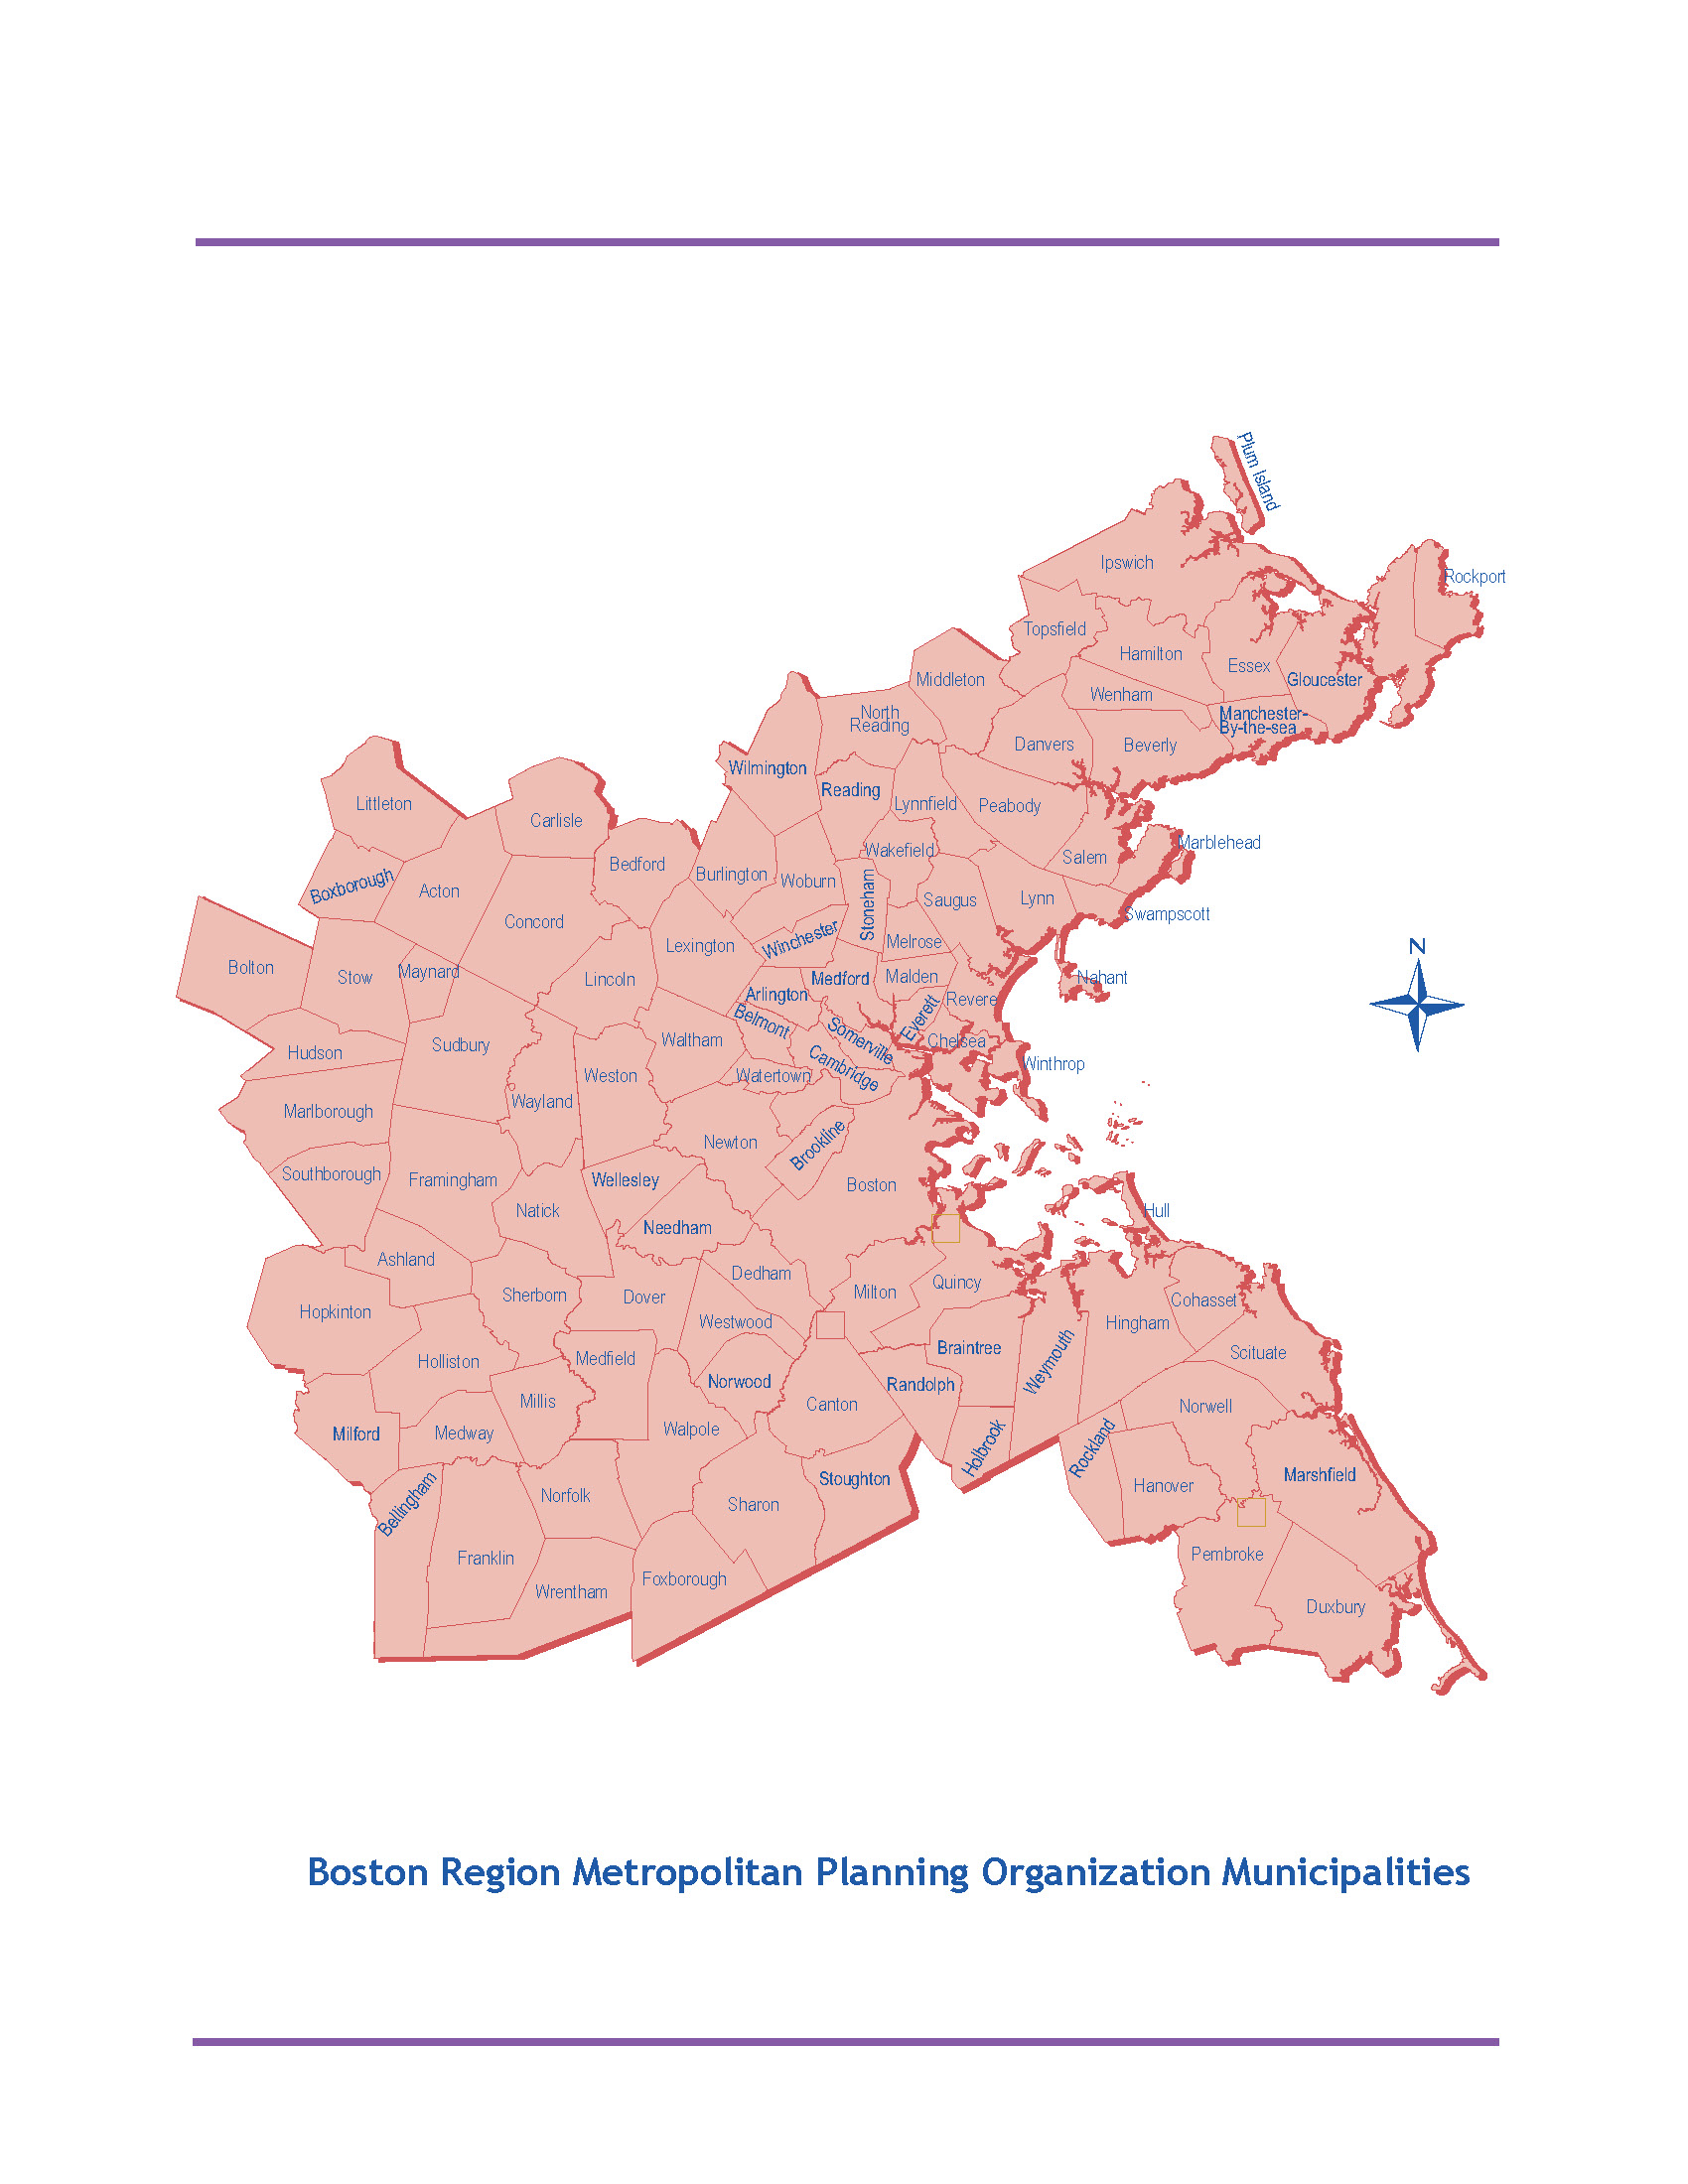 This image is a map of the Boston Region MPO region. This map includes the boundaries of the 101 cities and towns that are located within the region.